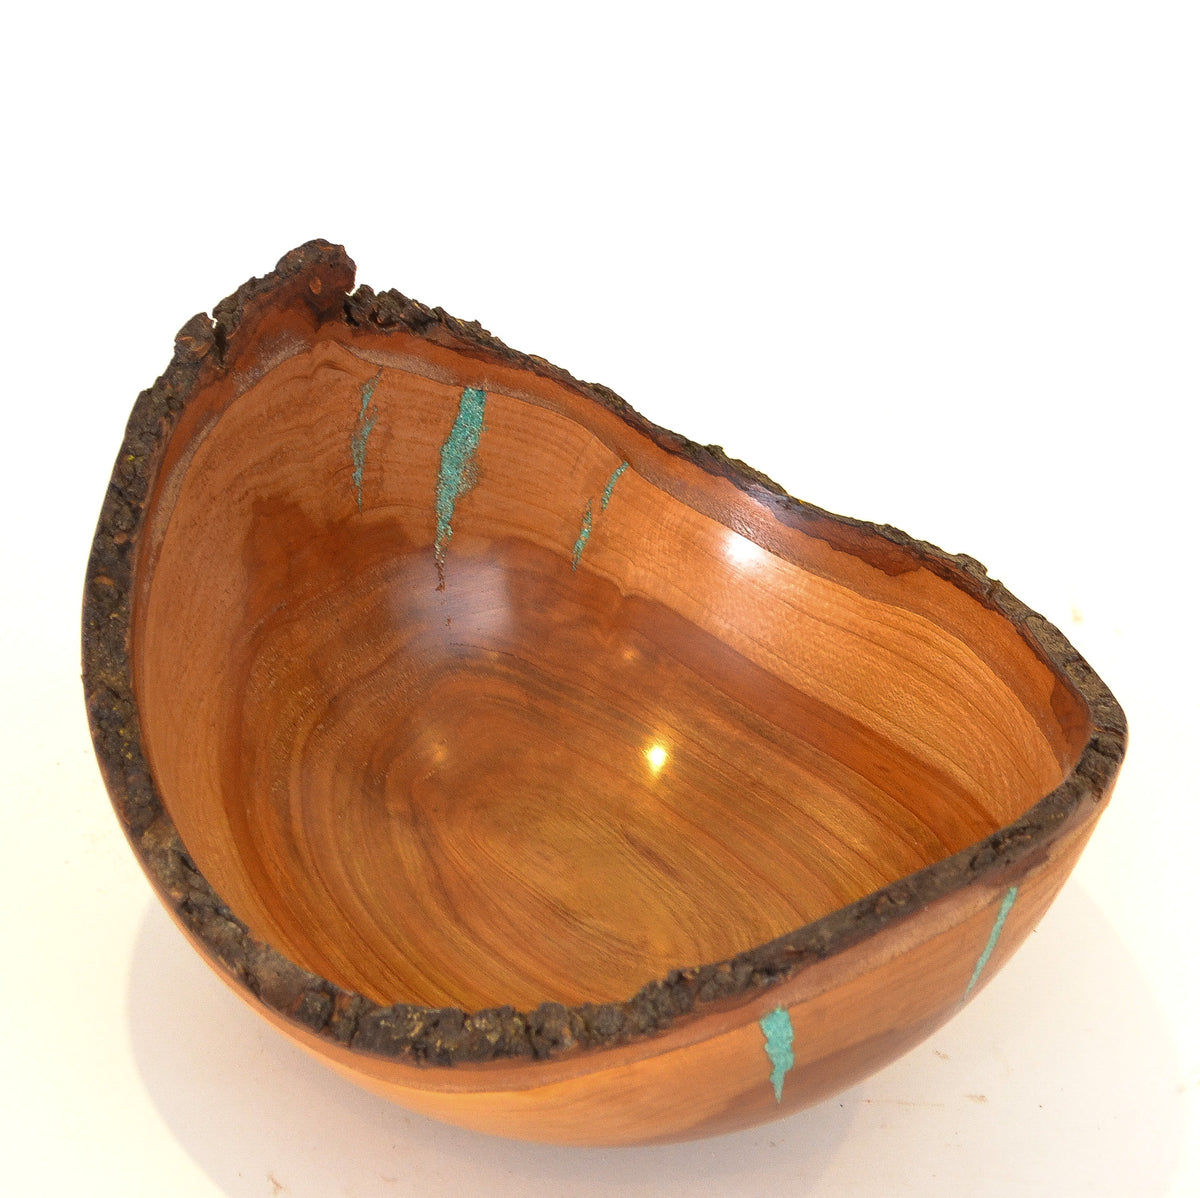 Natural Edge Wood Turned and Carved Bowl: Hint of Teal